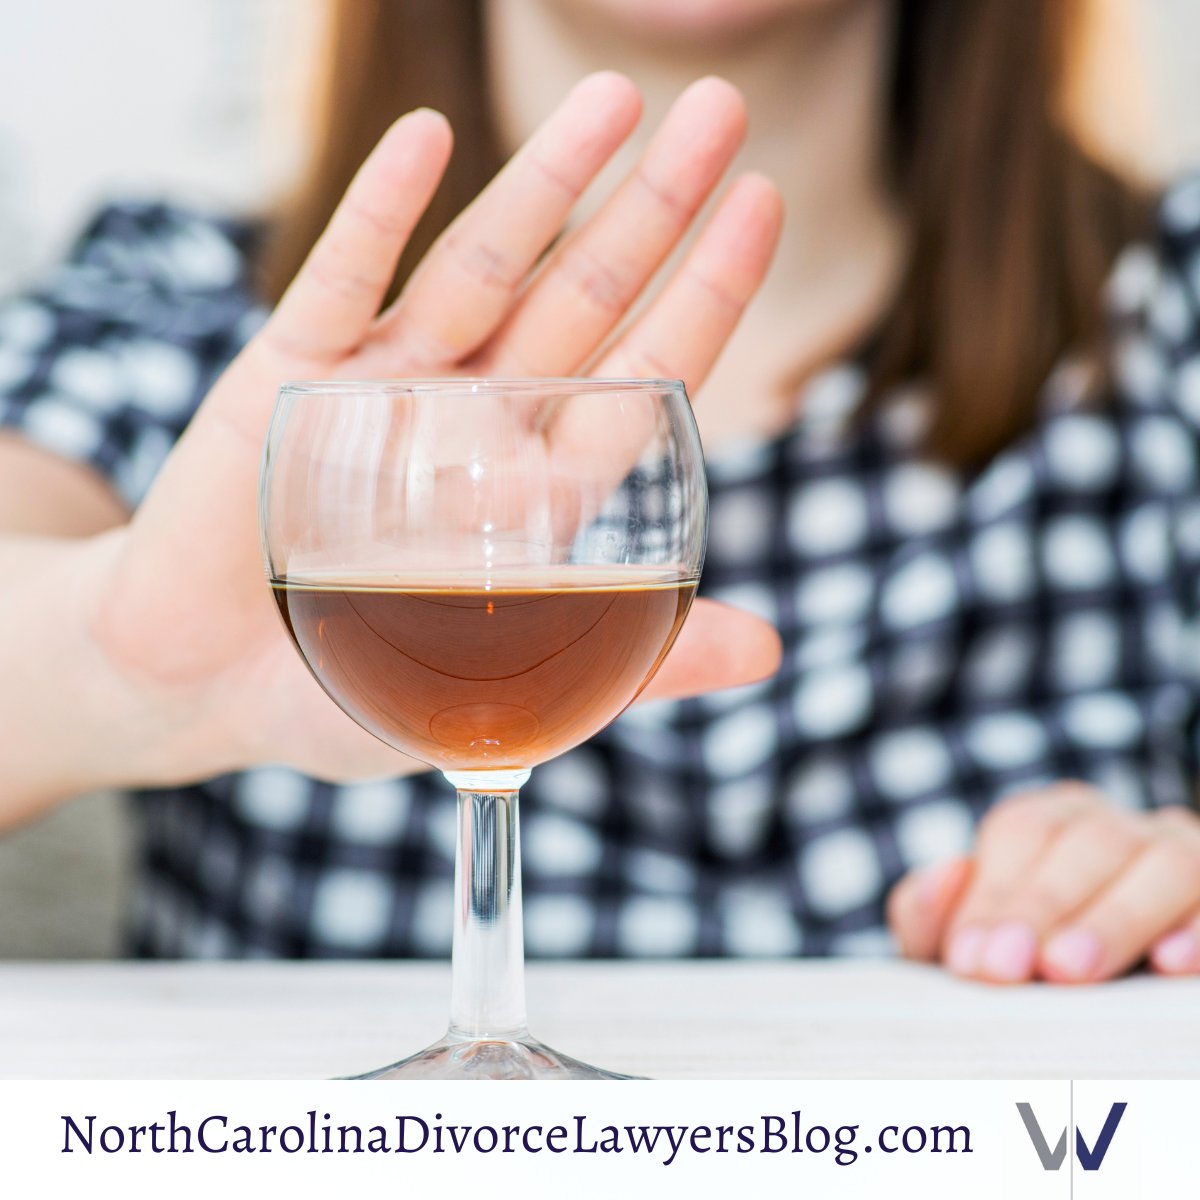 When a custodial parent abuses alcohol or other substances, the court will consider the parent's efforts in recovery when determining child custody and the best interest of the child. Read more in today's blog. #custody #alcoholabuse #divorce #familylaw